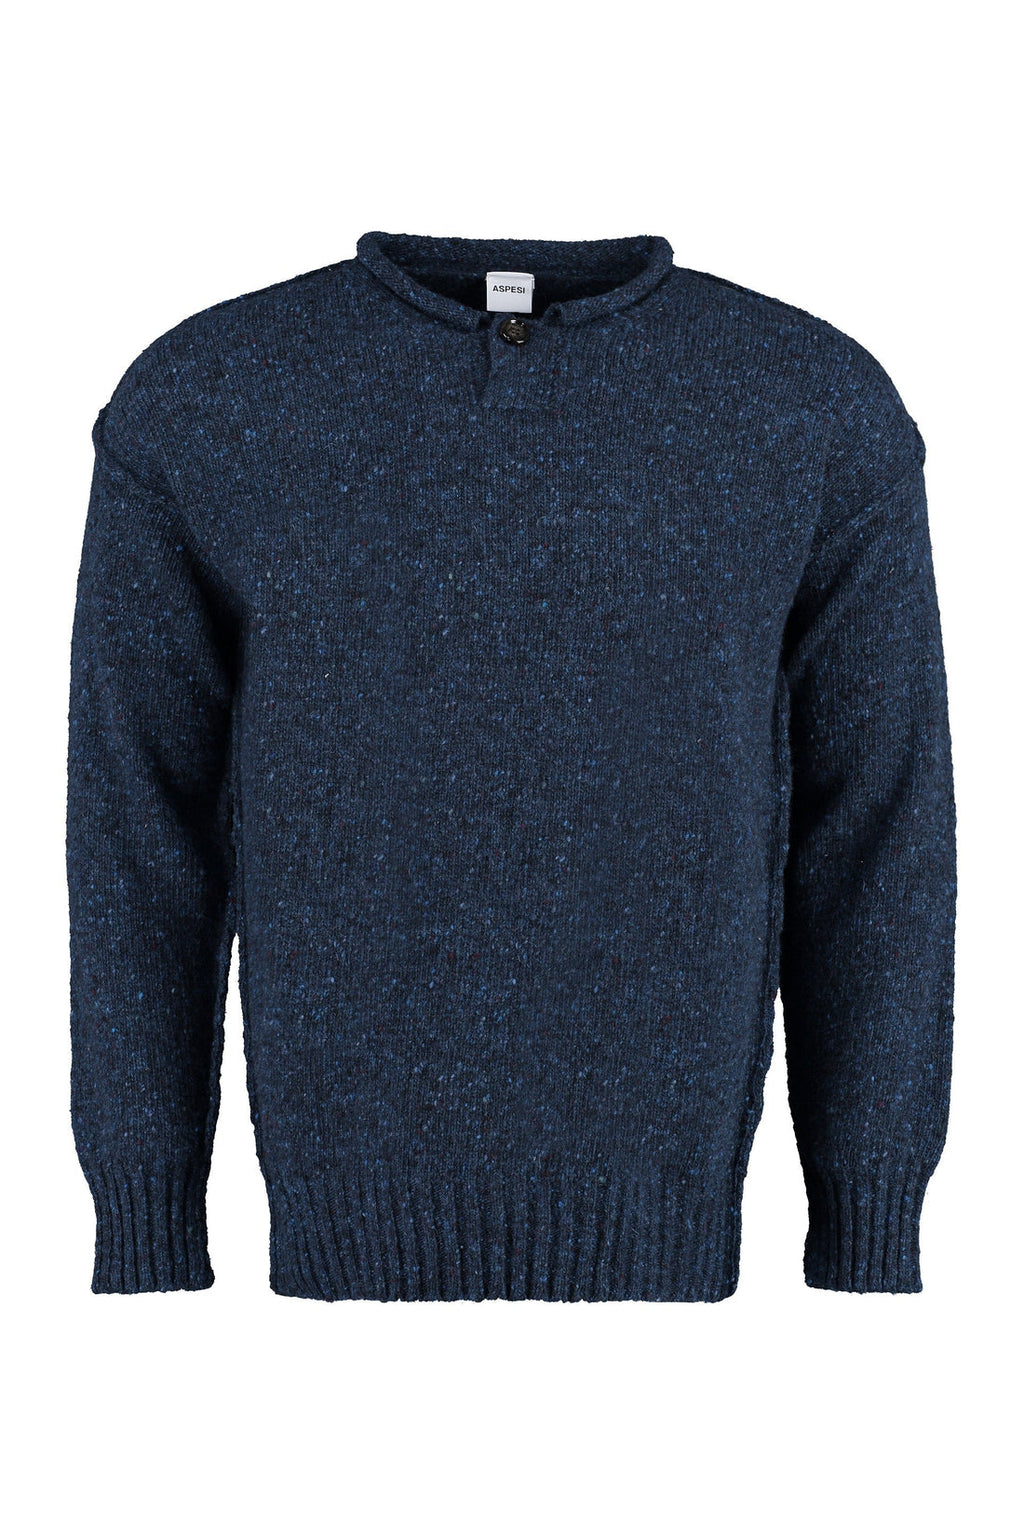 Aspesi-OUTLET-SALE-Knit wool pullover-ARCHIVIST